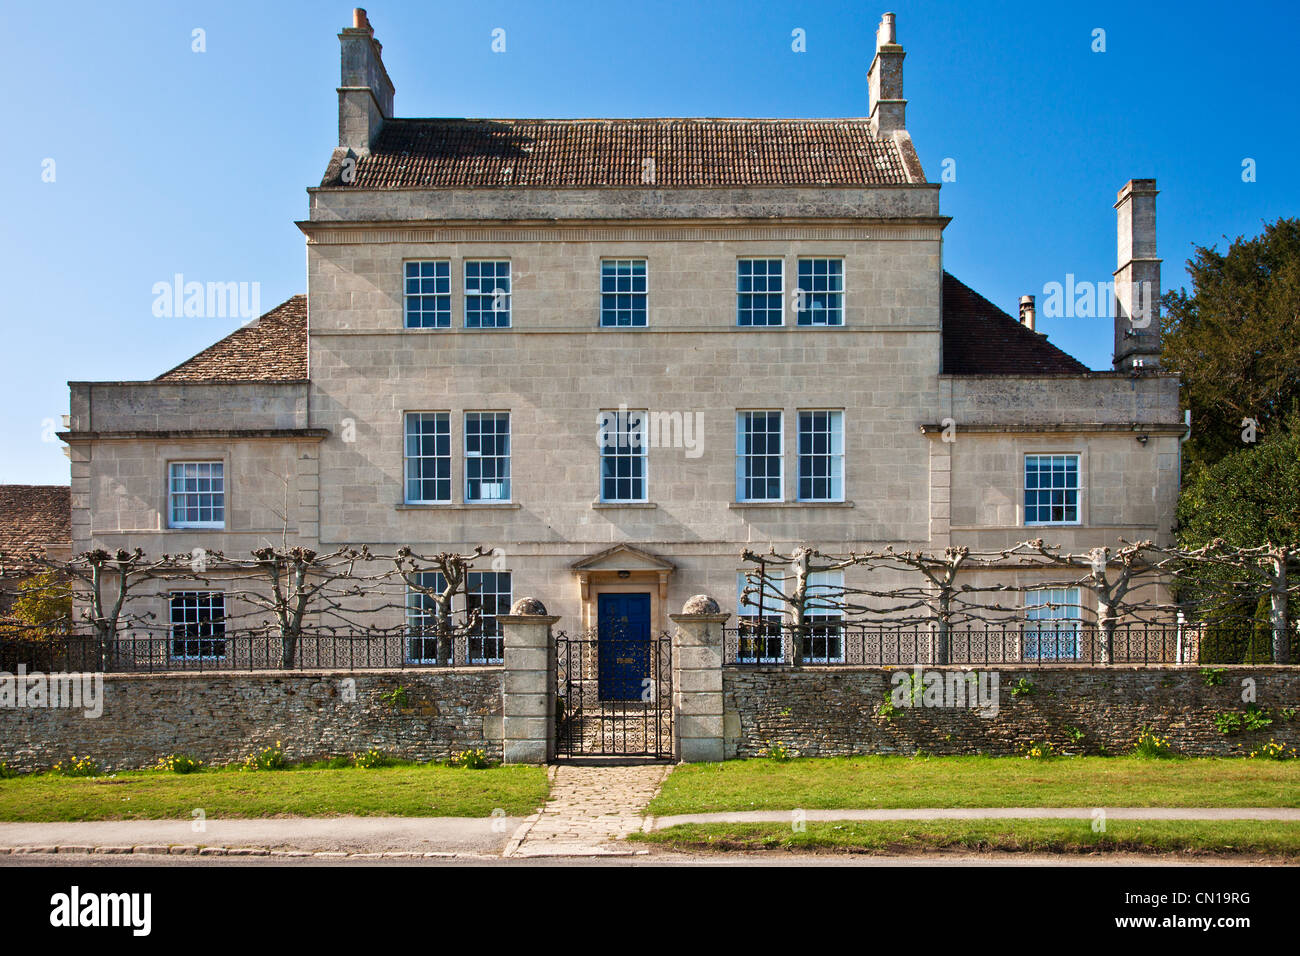 A typical, large 18th century Georgian stone country house or mansion in Wiltshire, England, UK Stock Photo